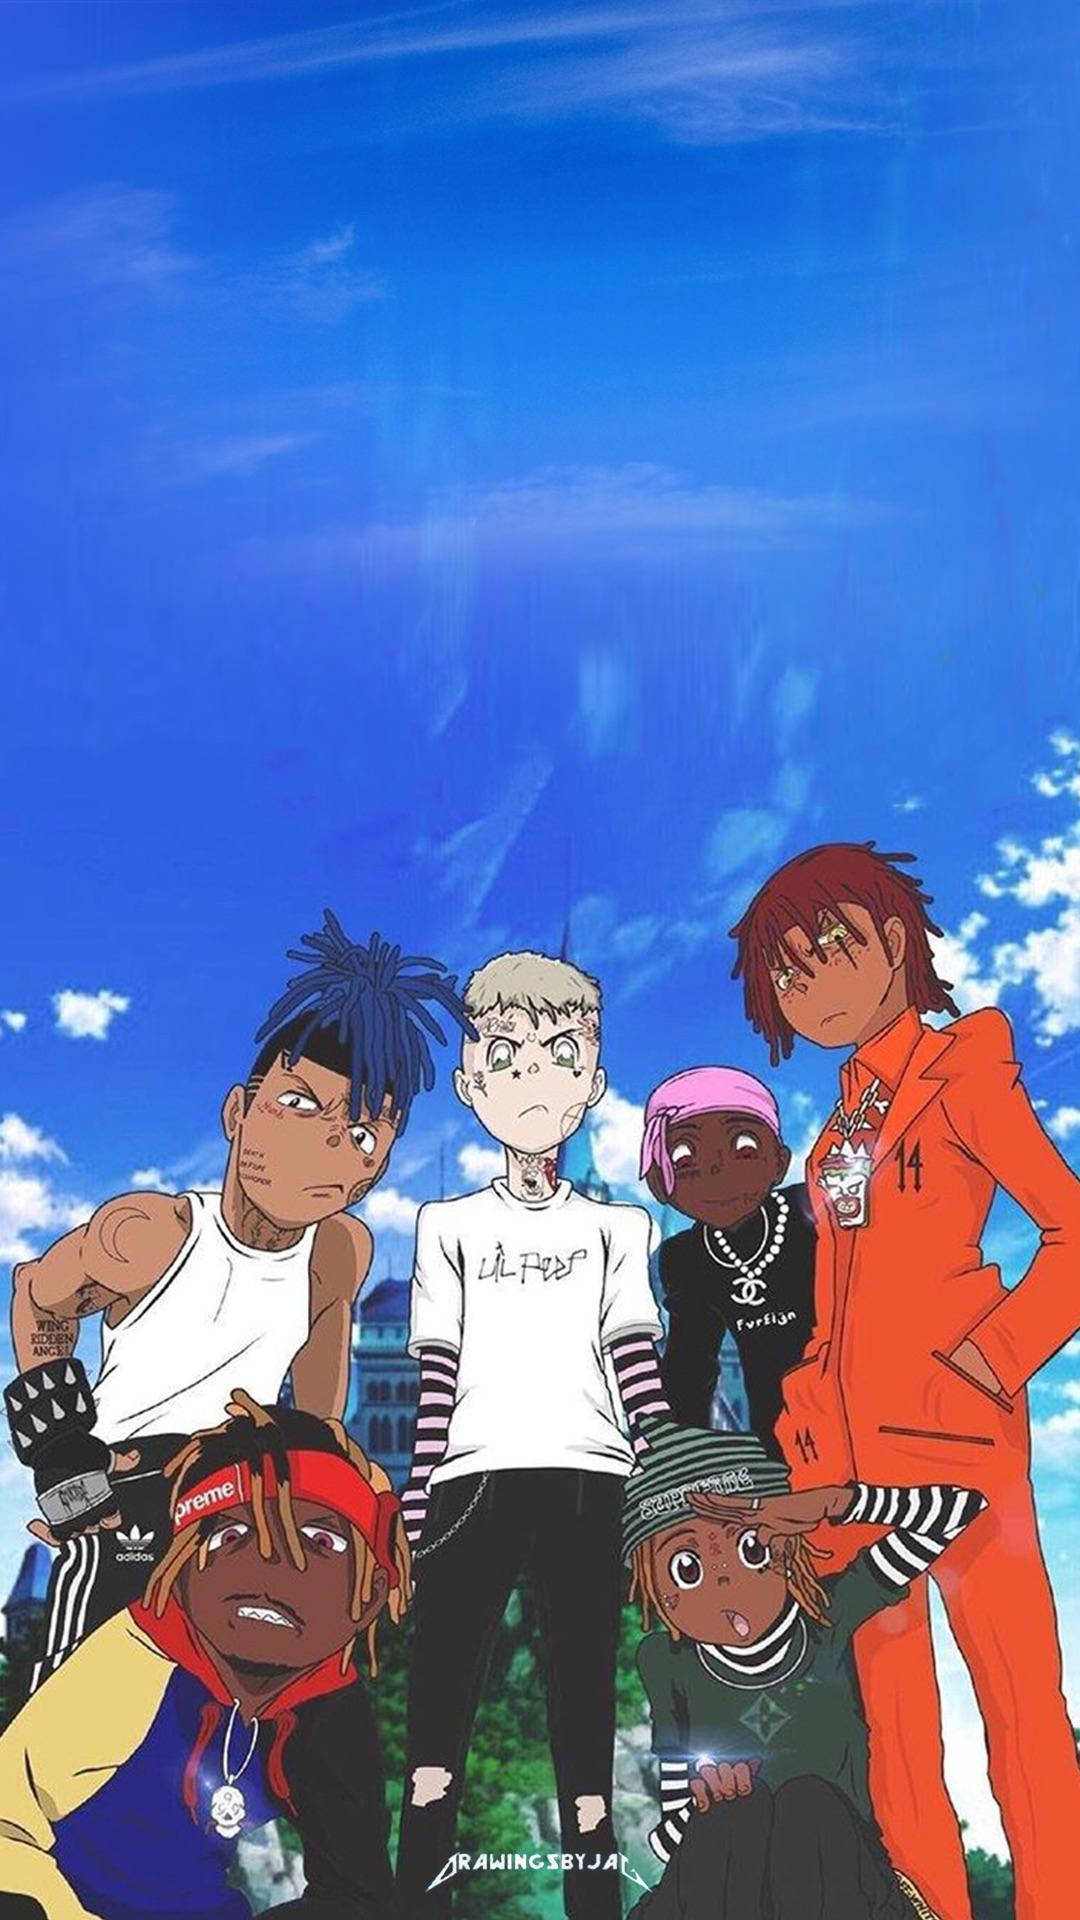 Animated Juice Wrld With Friends Wallpaper